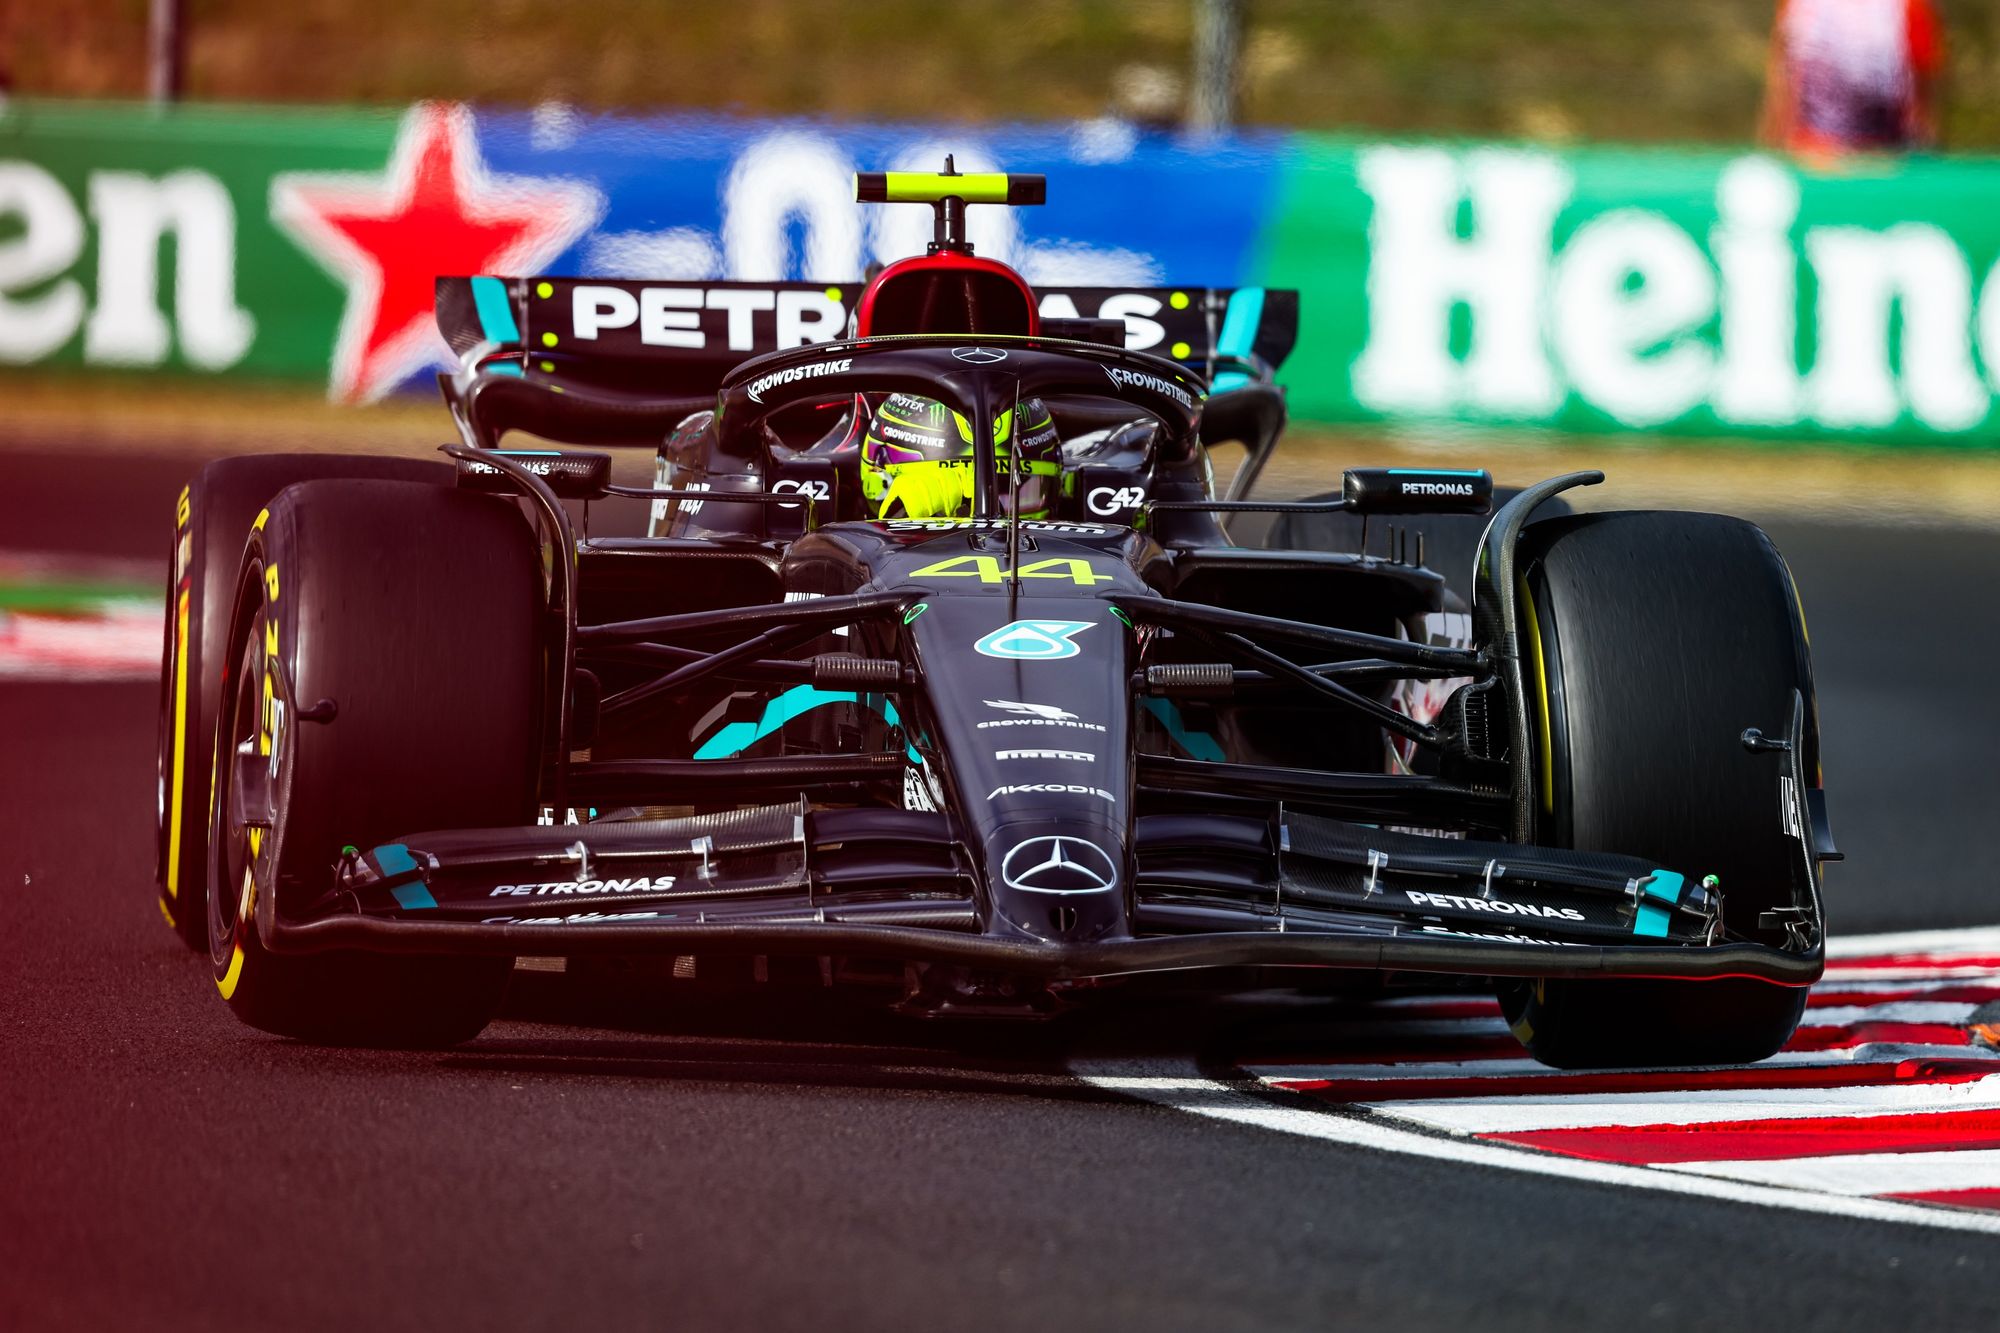 Lewis Hamilton ends drought with 104th pole at Hungarian GP, beating Verstappen